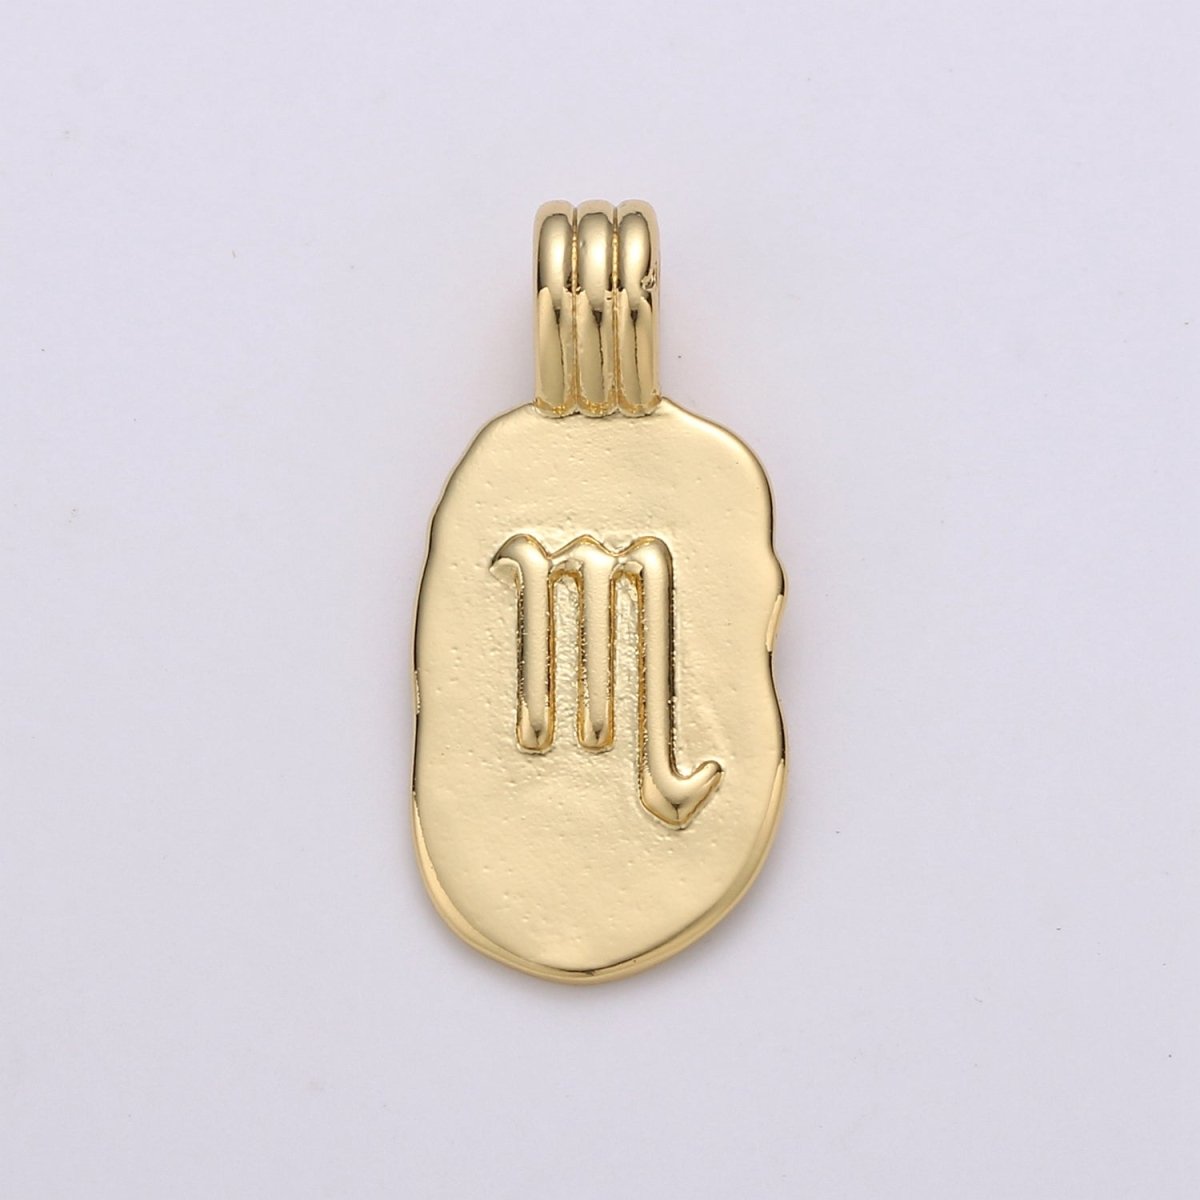 14K Gold Filled Zodiac Horoscope Sign Constellation Medallion Pendant Charm Celestial Astrology Charm for Necklace Jewelry Making Double Side | A-378-A-389 - DLUXCA